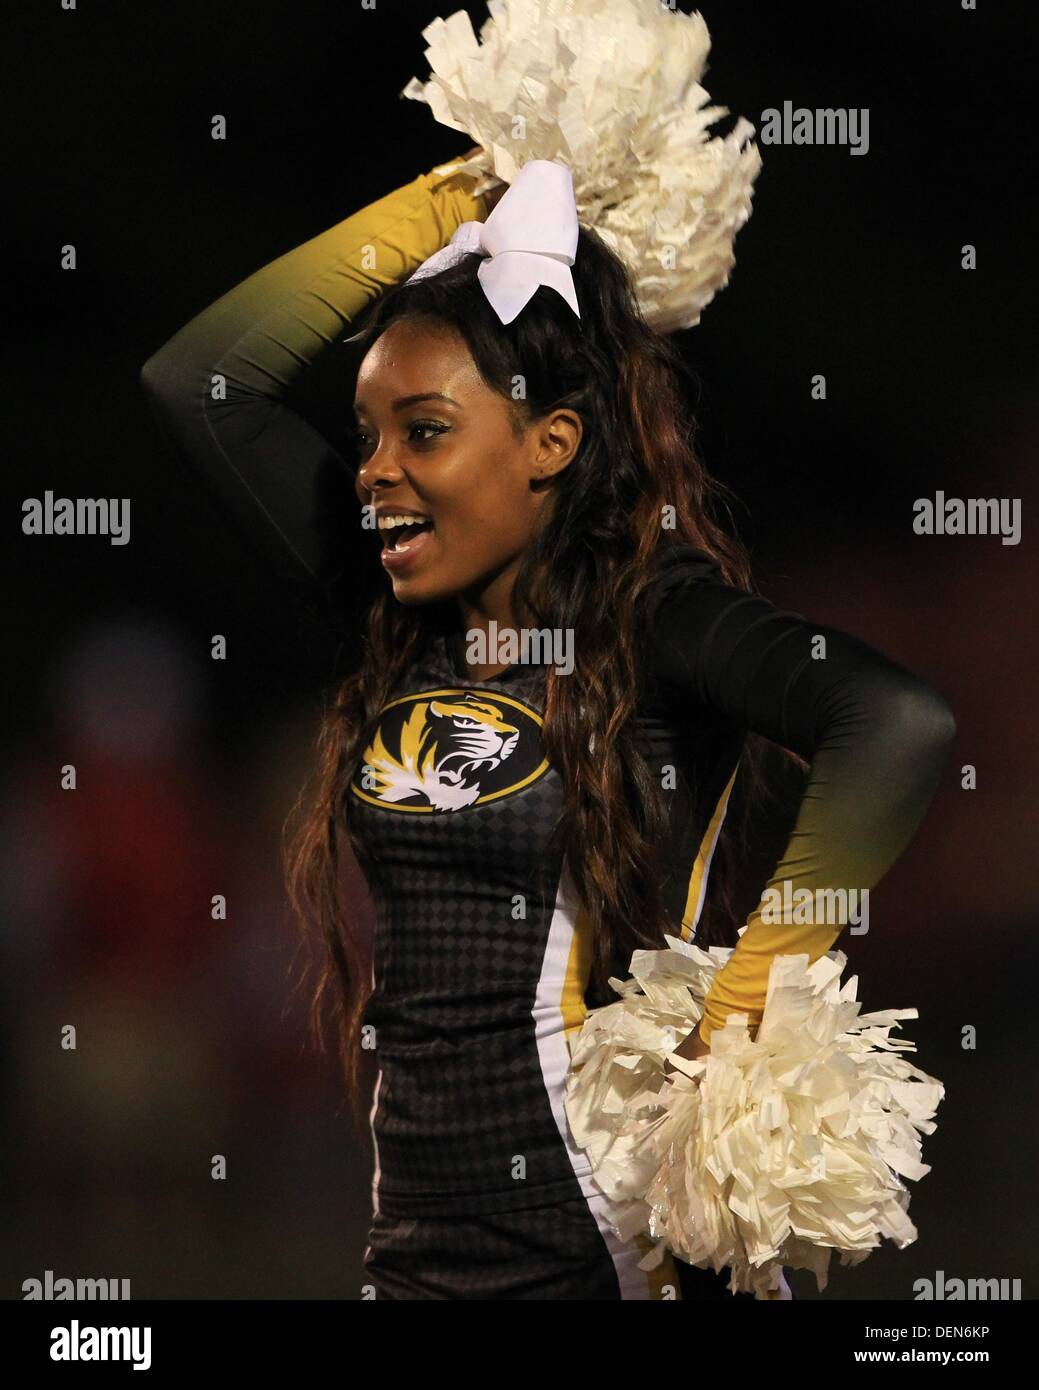 Bloomington, Indiana, USA. 21st Sep, 2013. September 21, 2013 - Missouri Tigers cheerleaders performs during an NCAA football game between Michigan State and Indiana at Memorial Stadium in Bloomington, Indiana. Missouri won 45-28. Credit:  csm/Alamy Live News Stock Photo